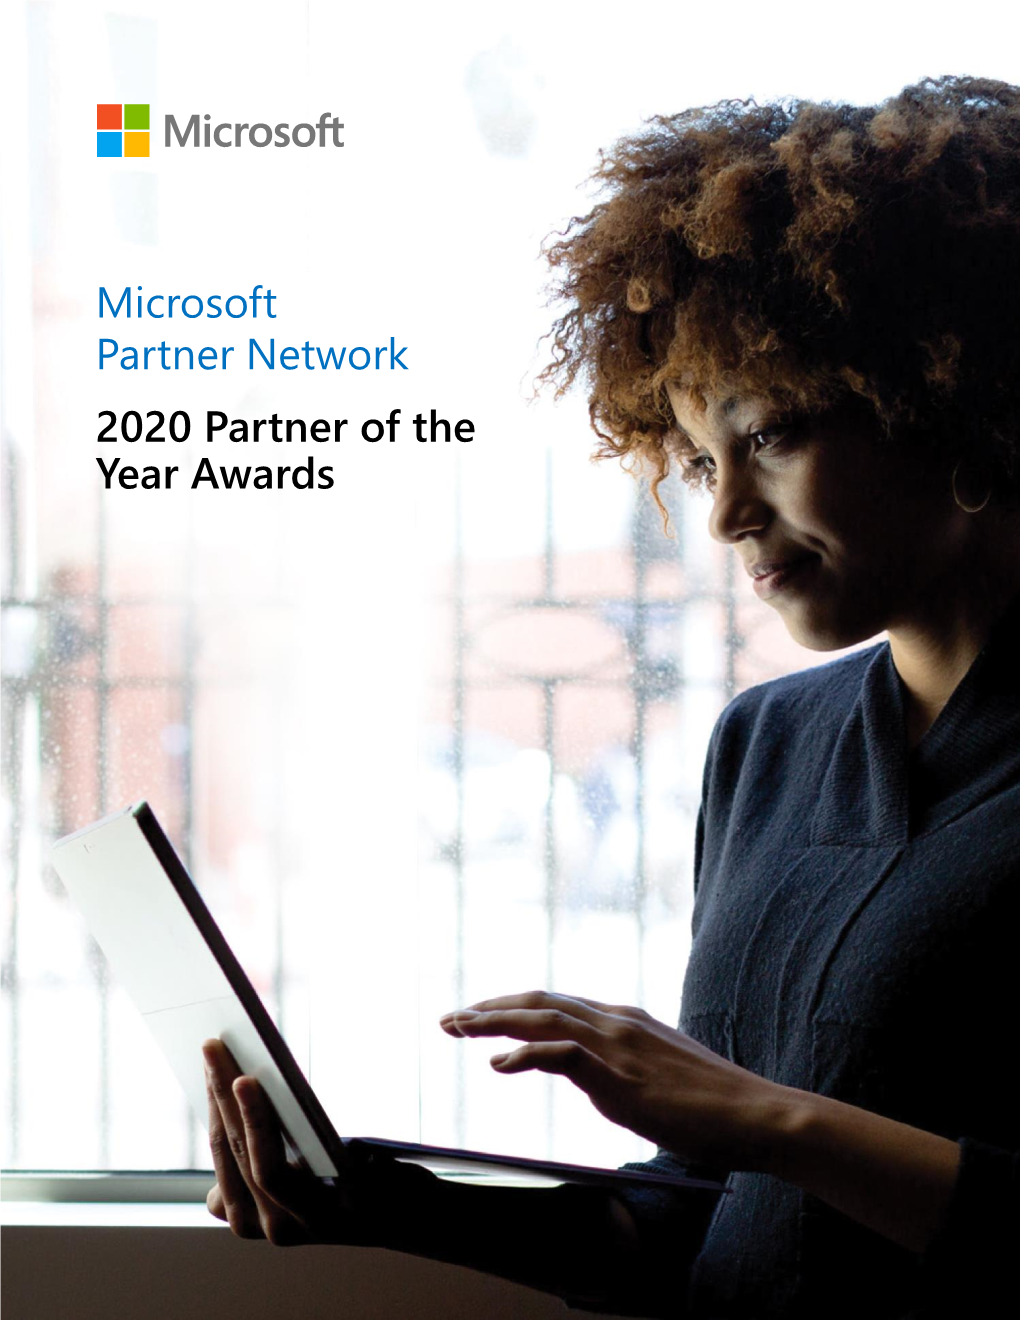 Microsoft Partner Network 2020 Partner of the Year Awards Table of Contents